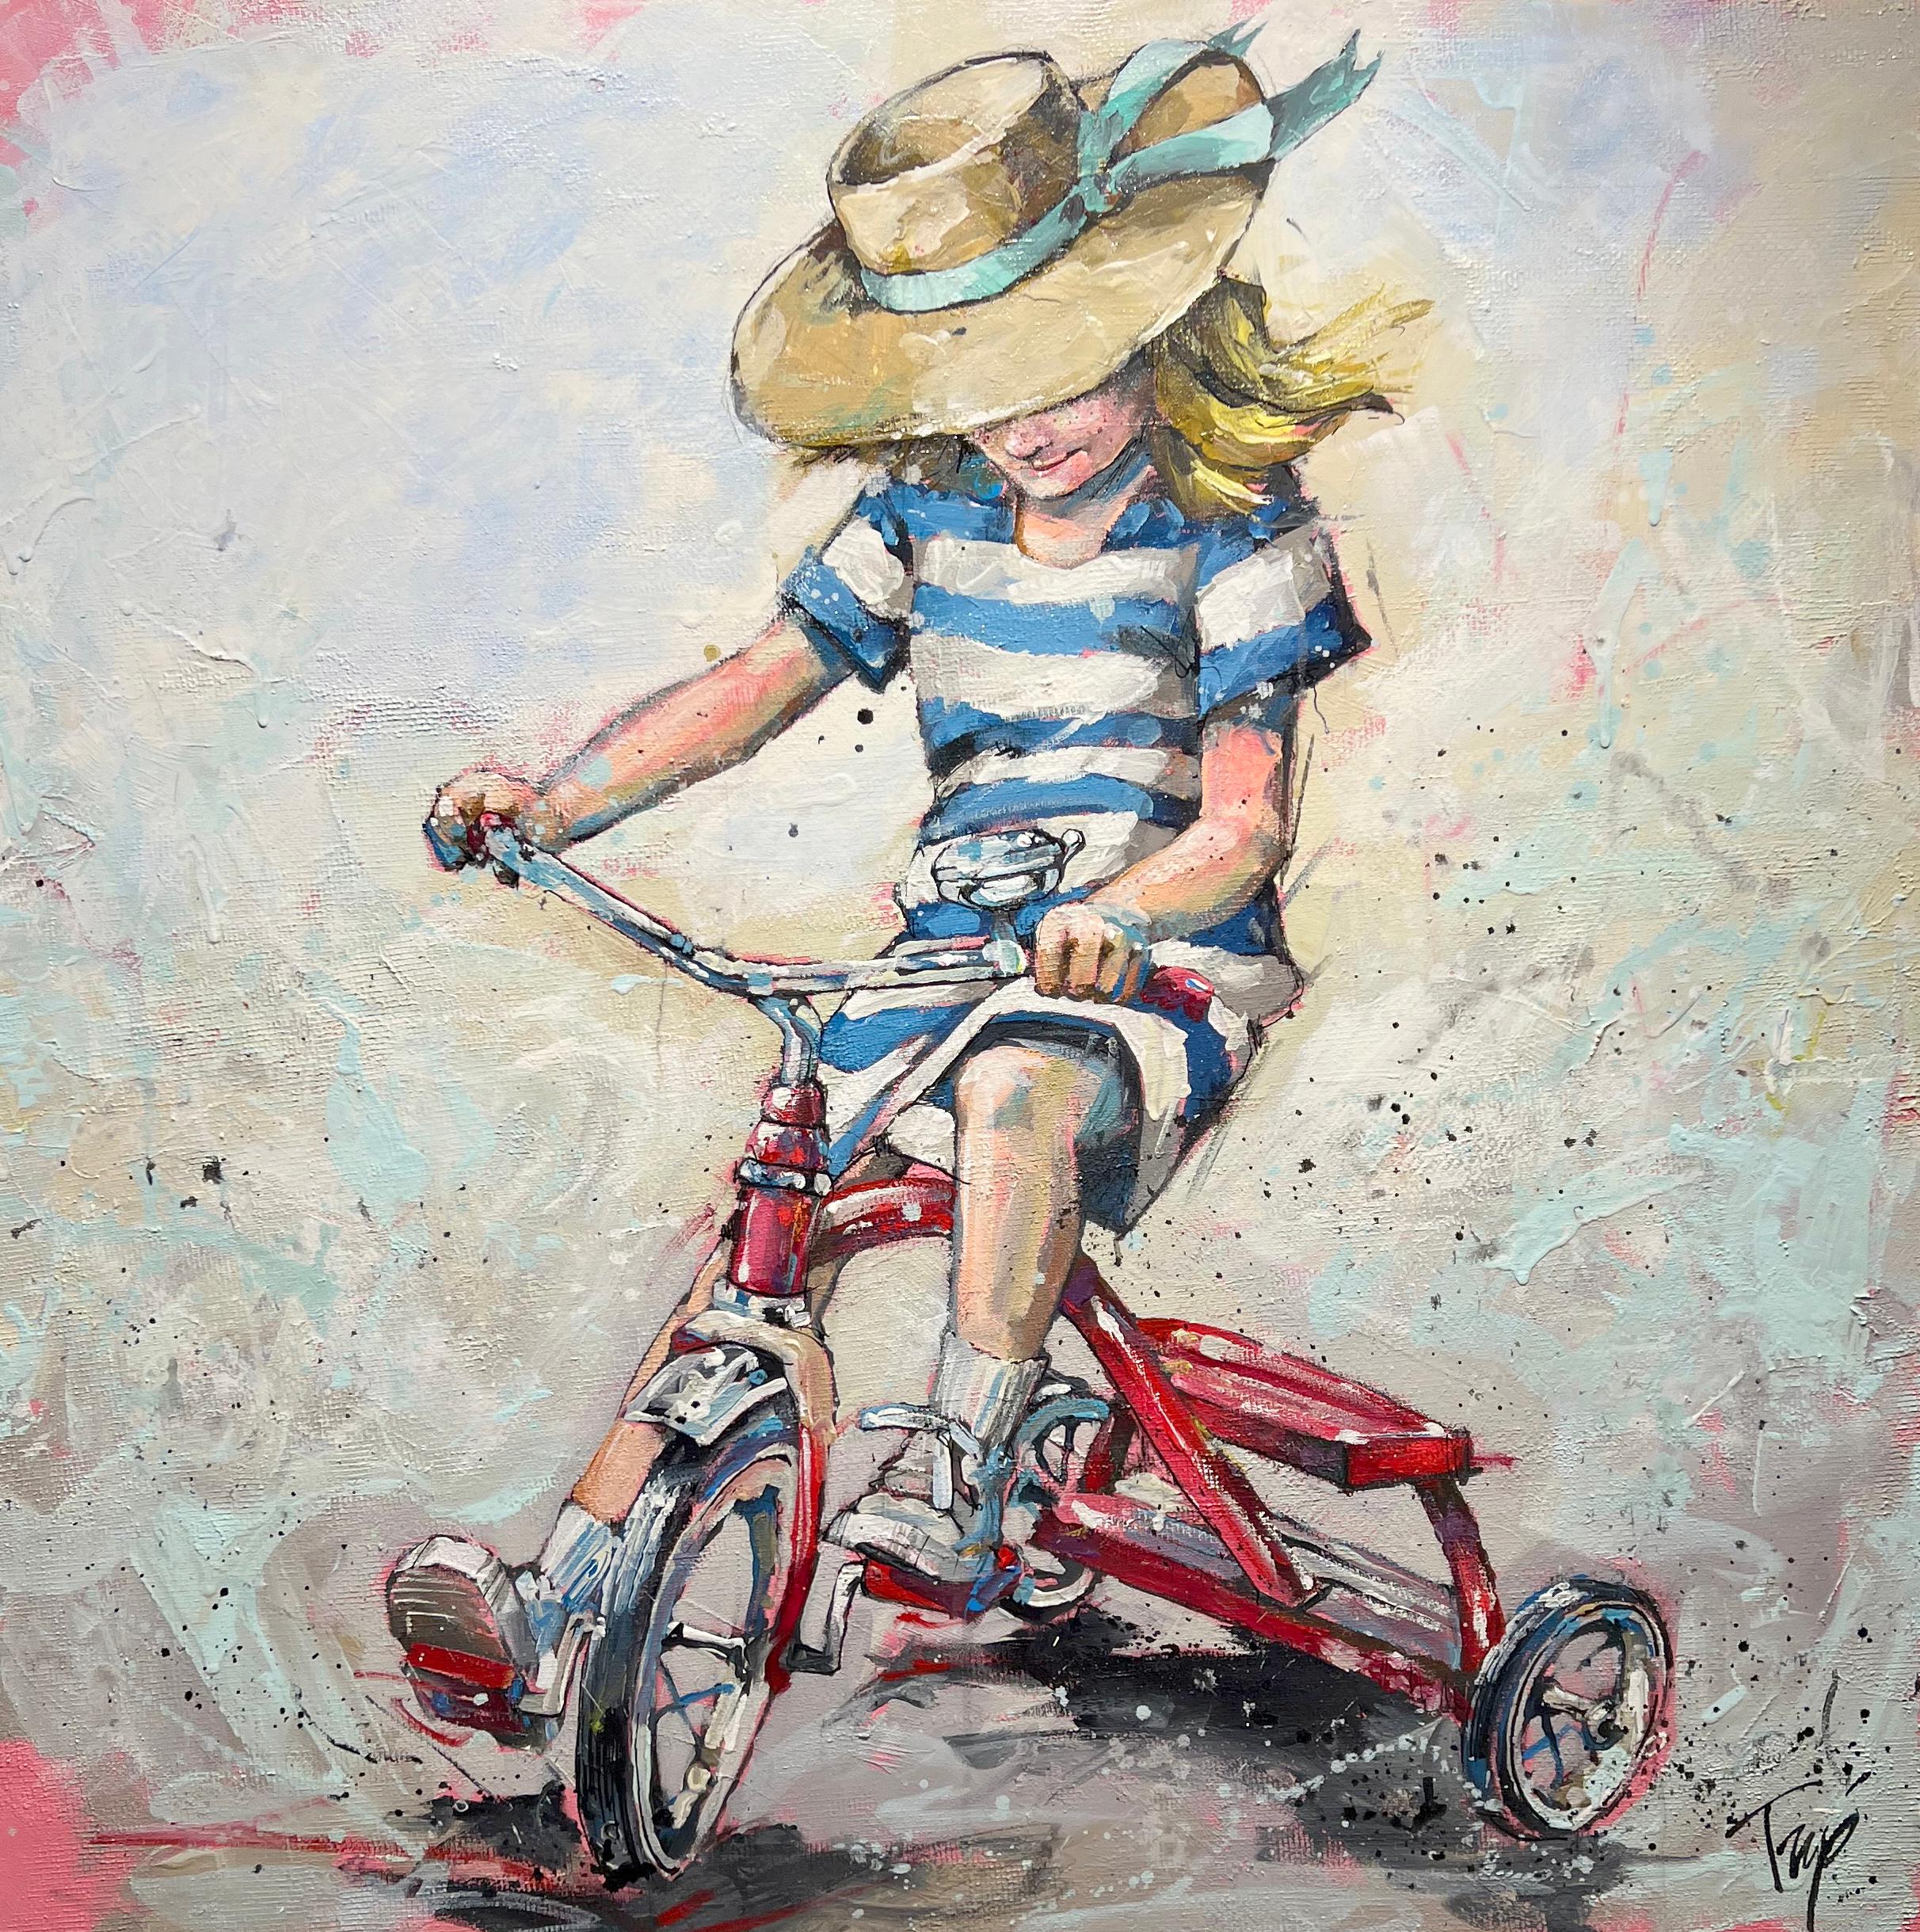 Park, "Dream Ride", 40x40 Whimsical Tricycle Girl Oil Painting on Canvas